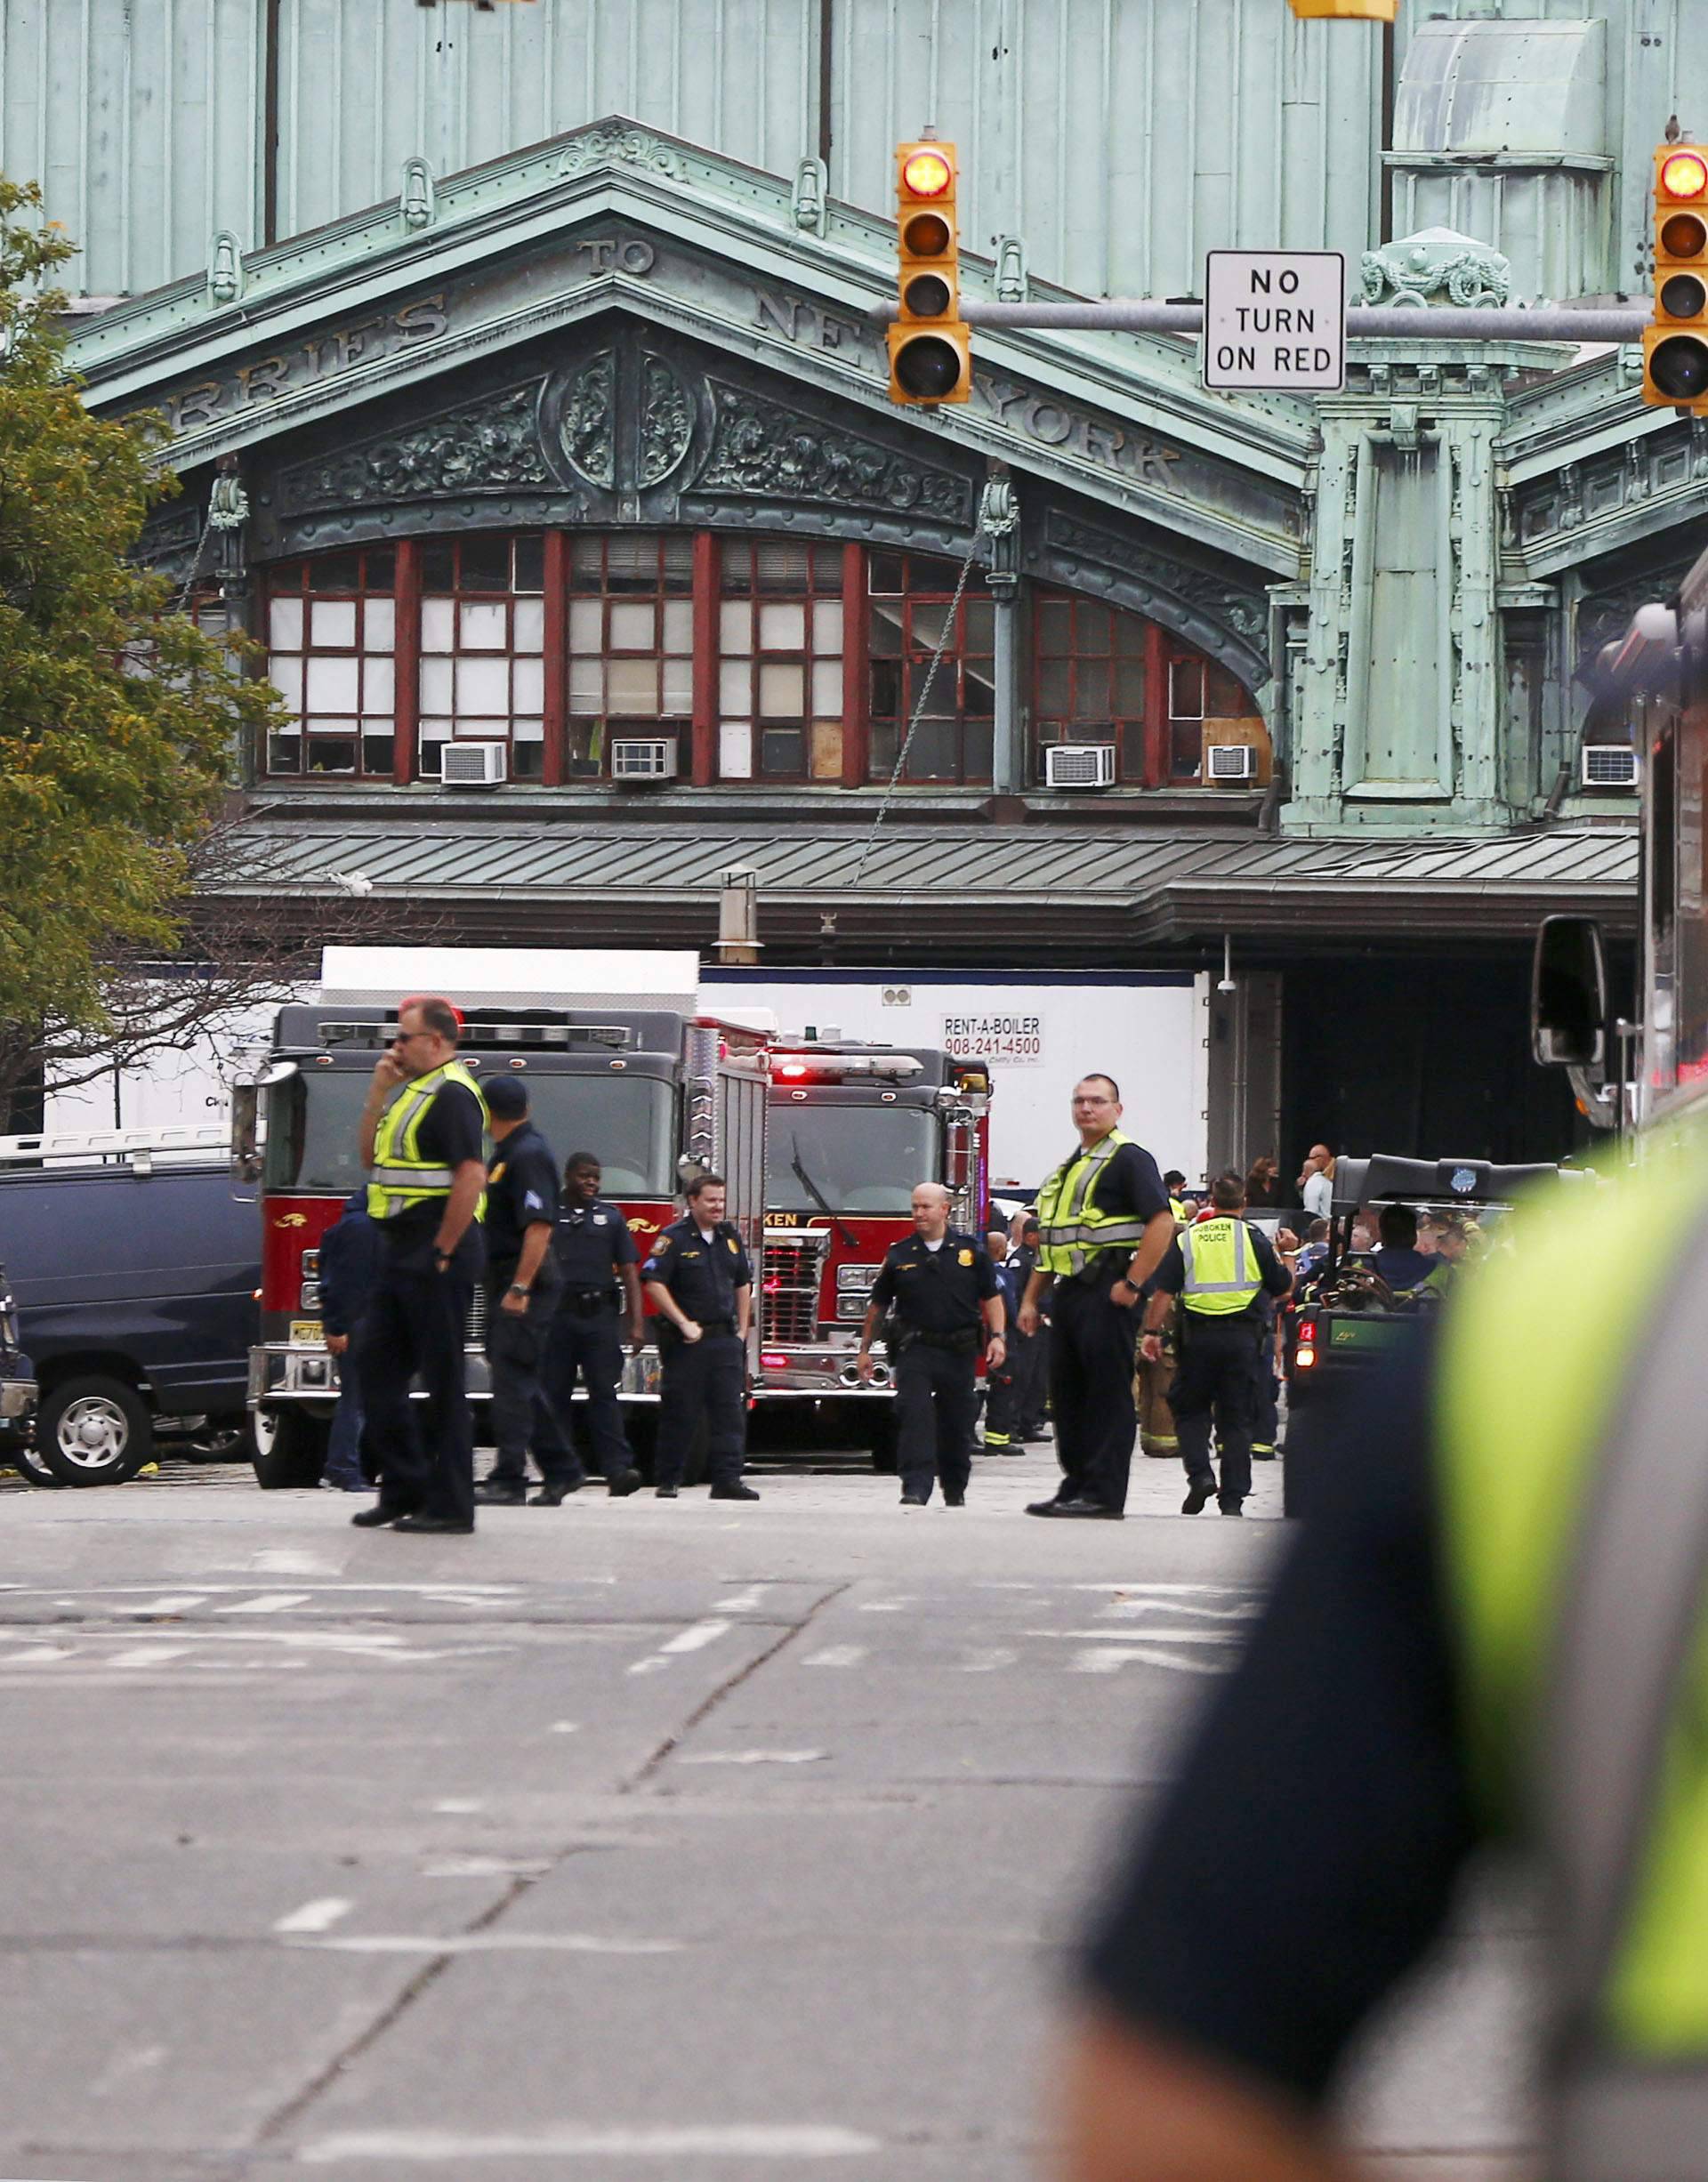 Hoboken police officers look over the scene of a train crash where a New Jersey Transit train derailed and crashed through the station, injuring more than 100 people, in Hoboken